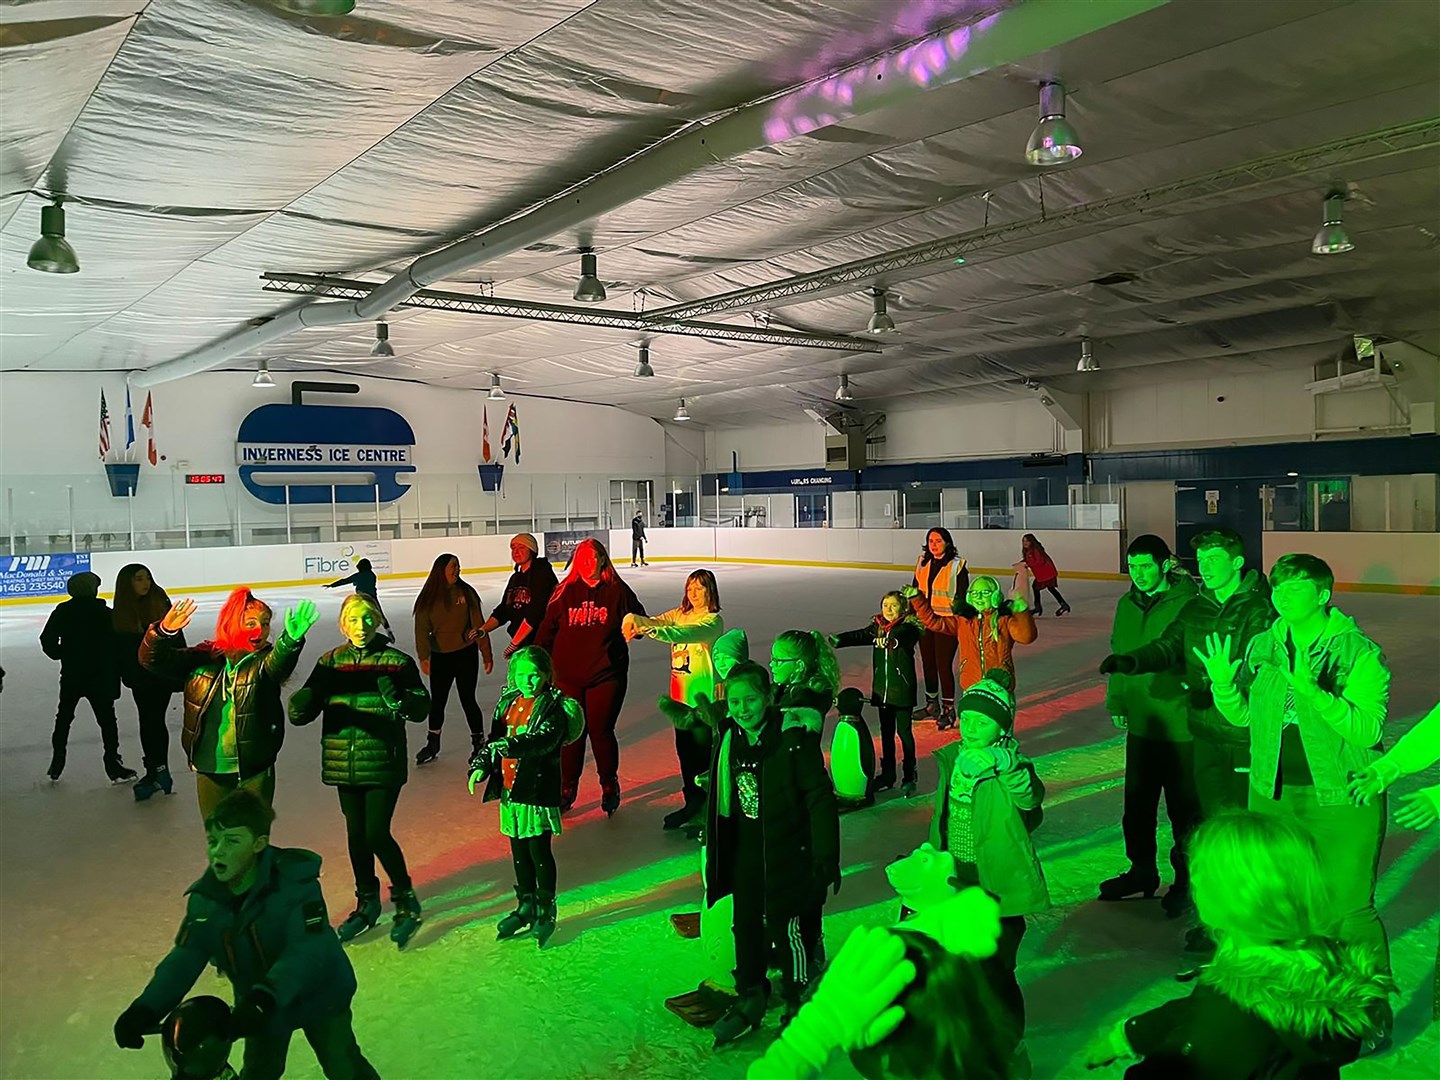 Nearly 100 people enjoyed the ice skating party.